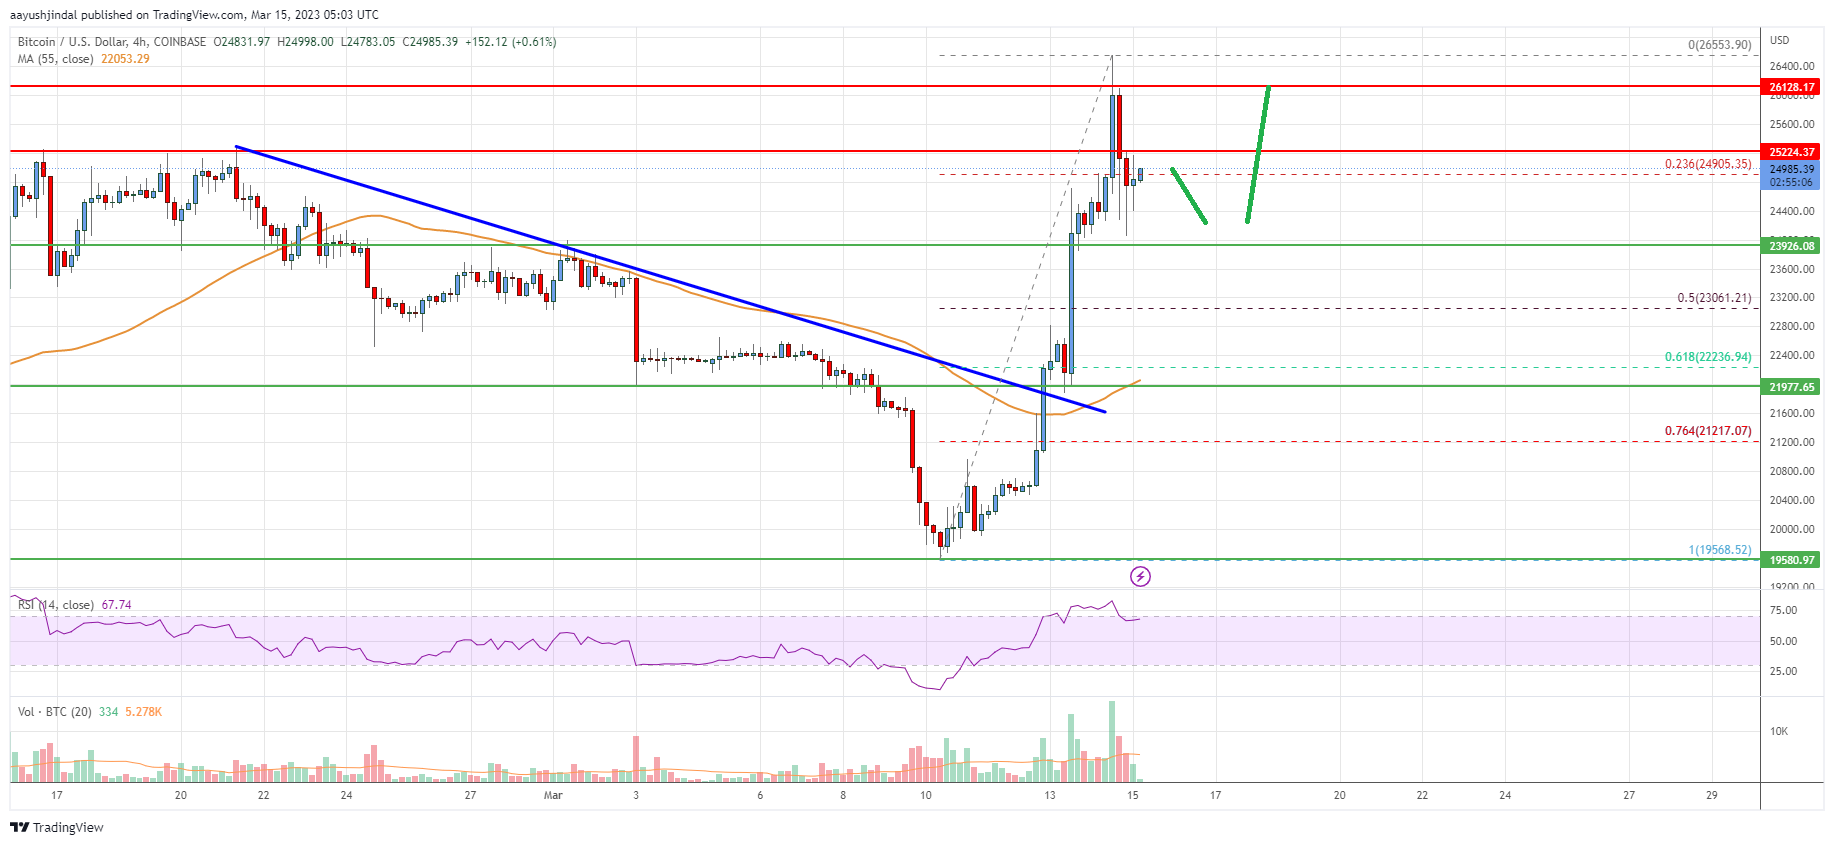 Bitcoin Price Analysis: BTC Rally Could Extend Above $26K